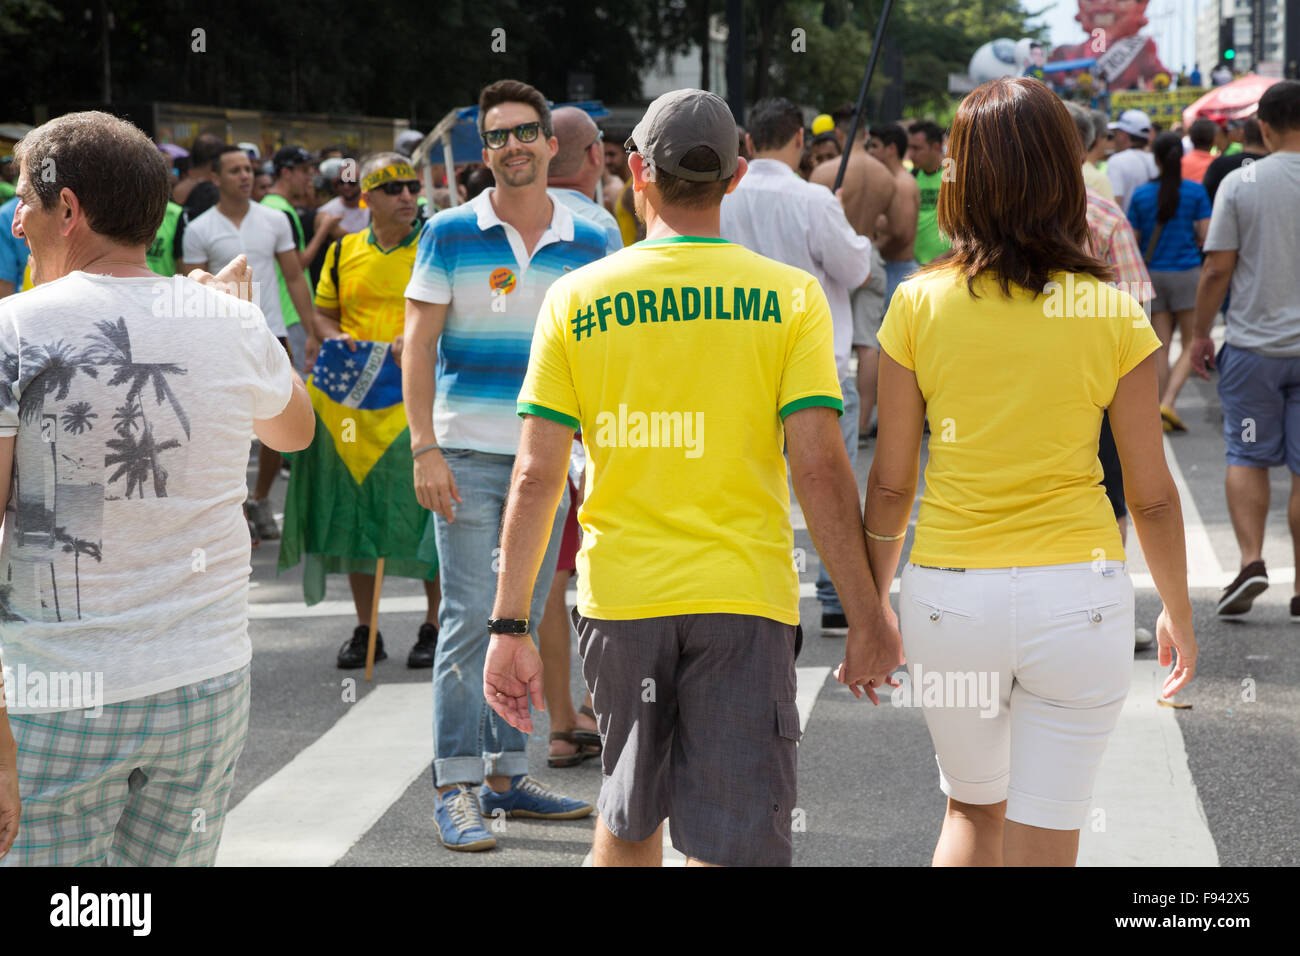 Sao Paulo, Brazil. 13th December, 2015. Demonstrator wears a t-shirt written in Portuguese 'Fora Dilma' (in English 'Out Dilma') during a demonstration calling for the impeachment of Brazil's President Dilma Rousseff in Paulista avenue, Sao Paulo, Brazil. Credit: Andre M. Chang/Alamy Live News Stock Photo